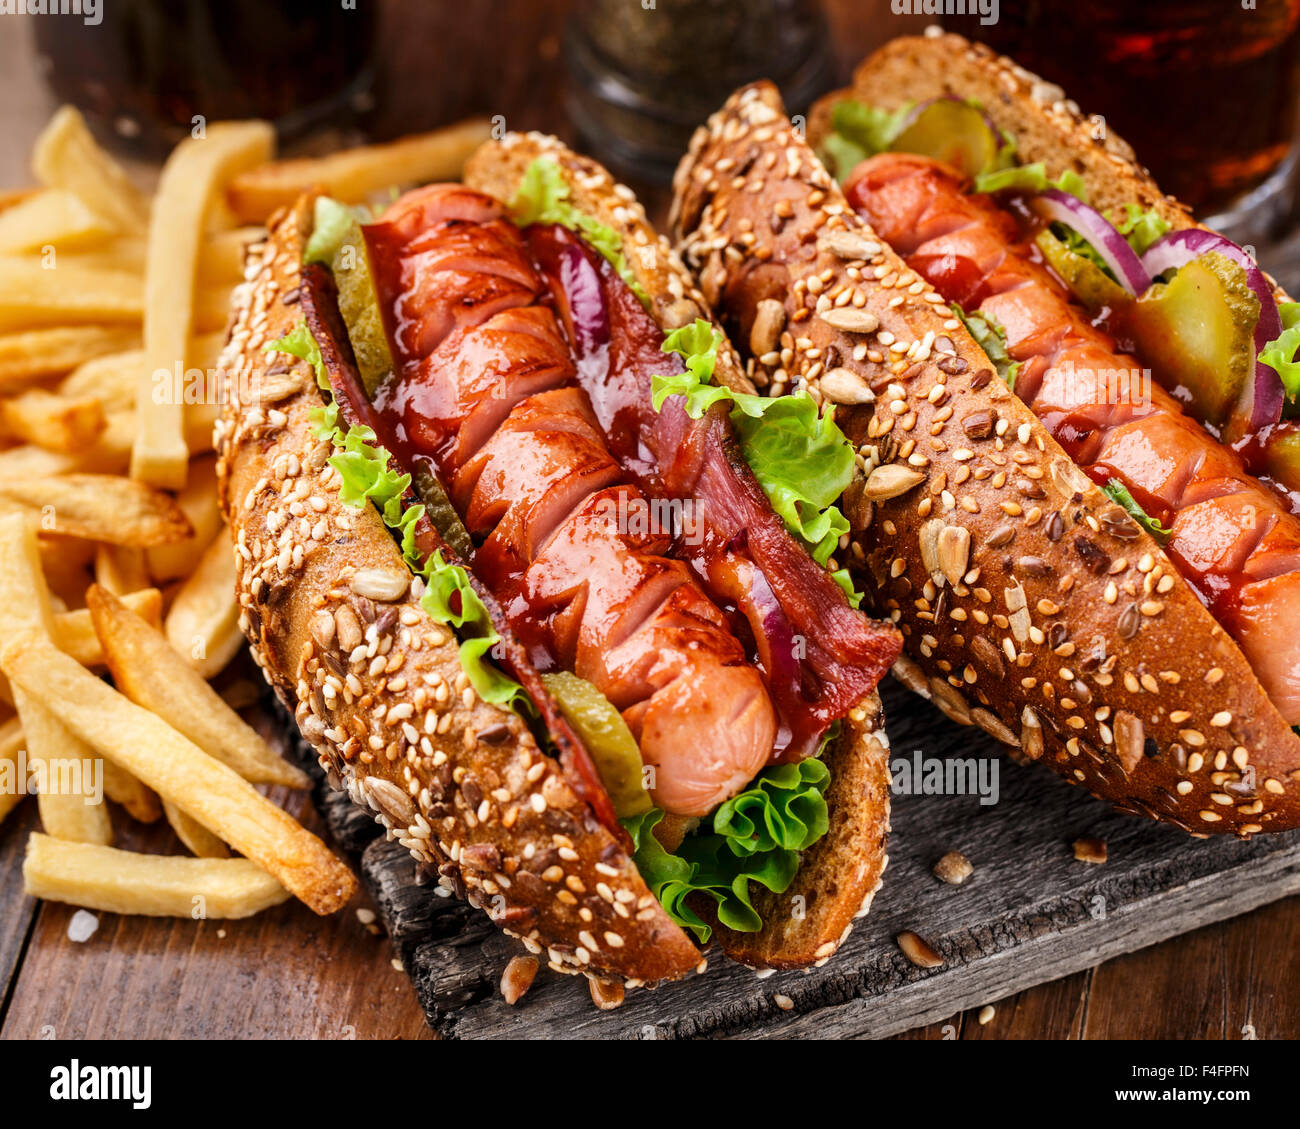 Barbecue grilled hot dog with french fries Stock Photo